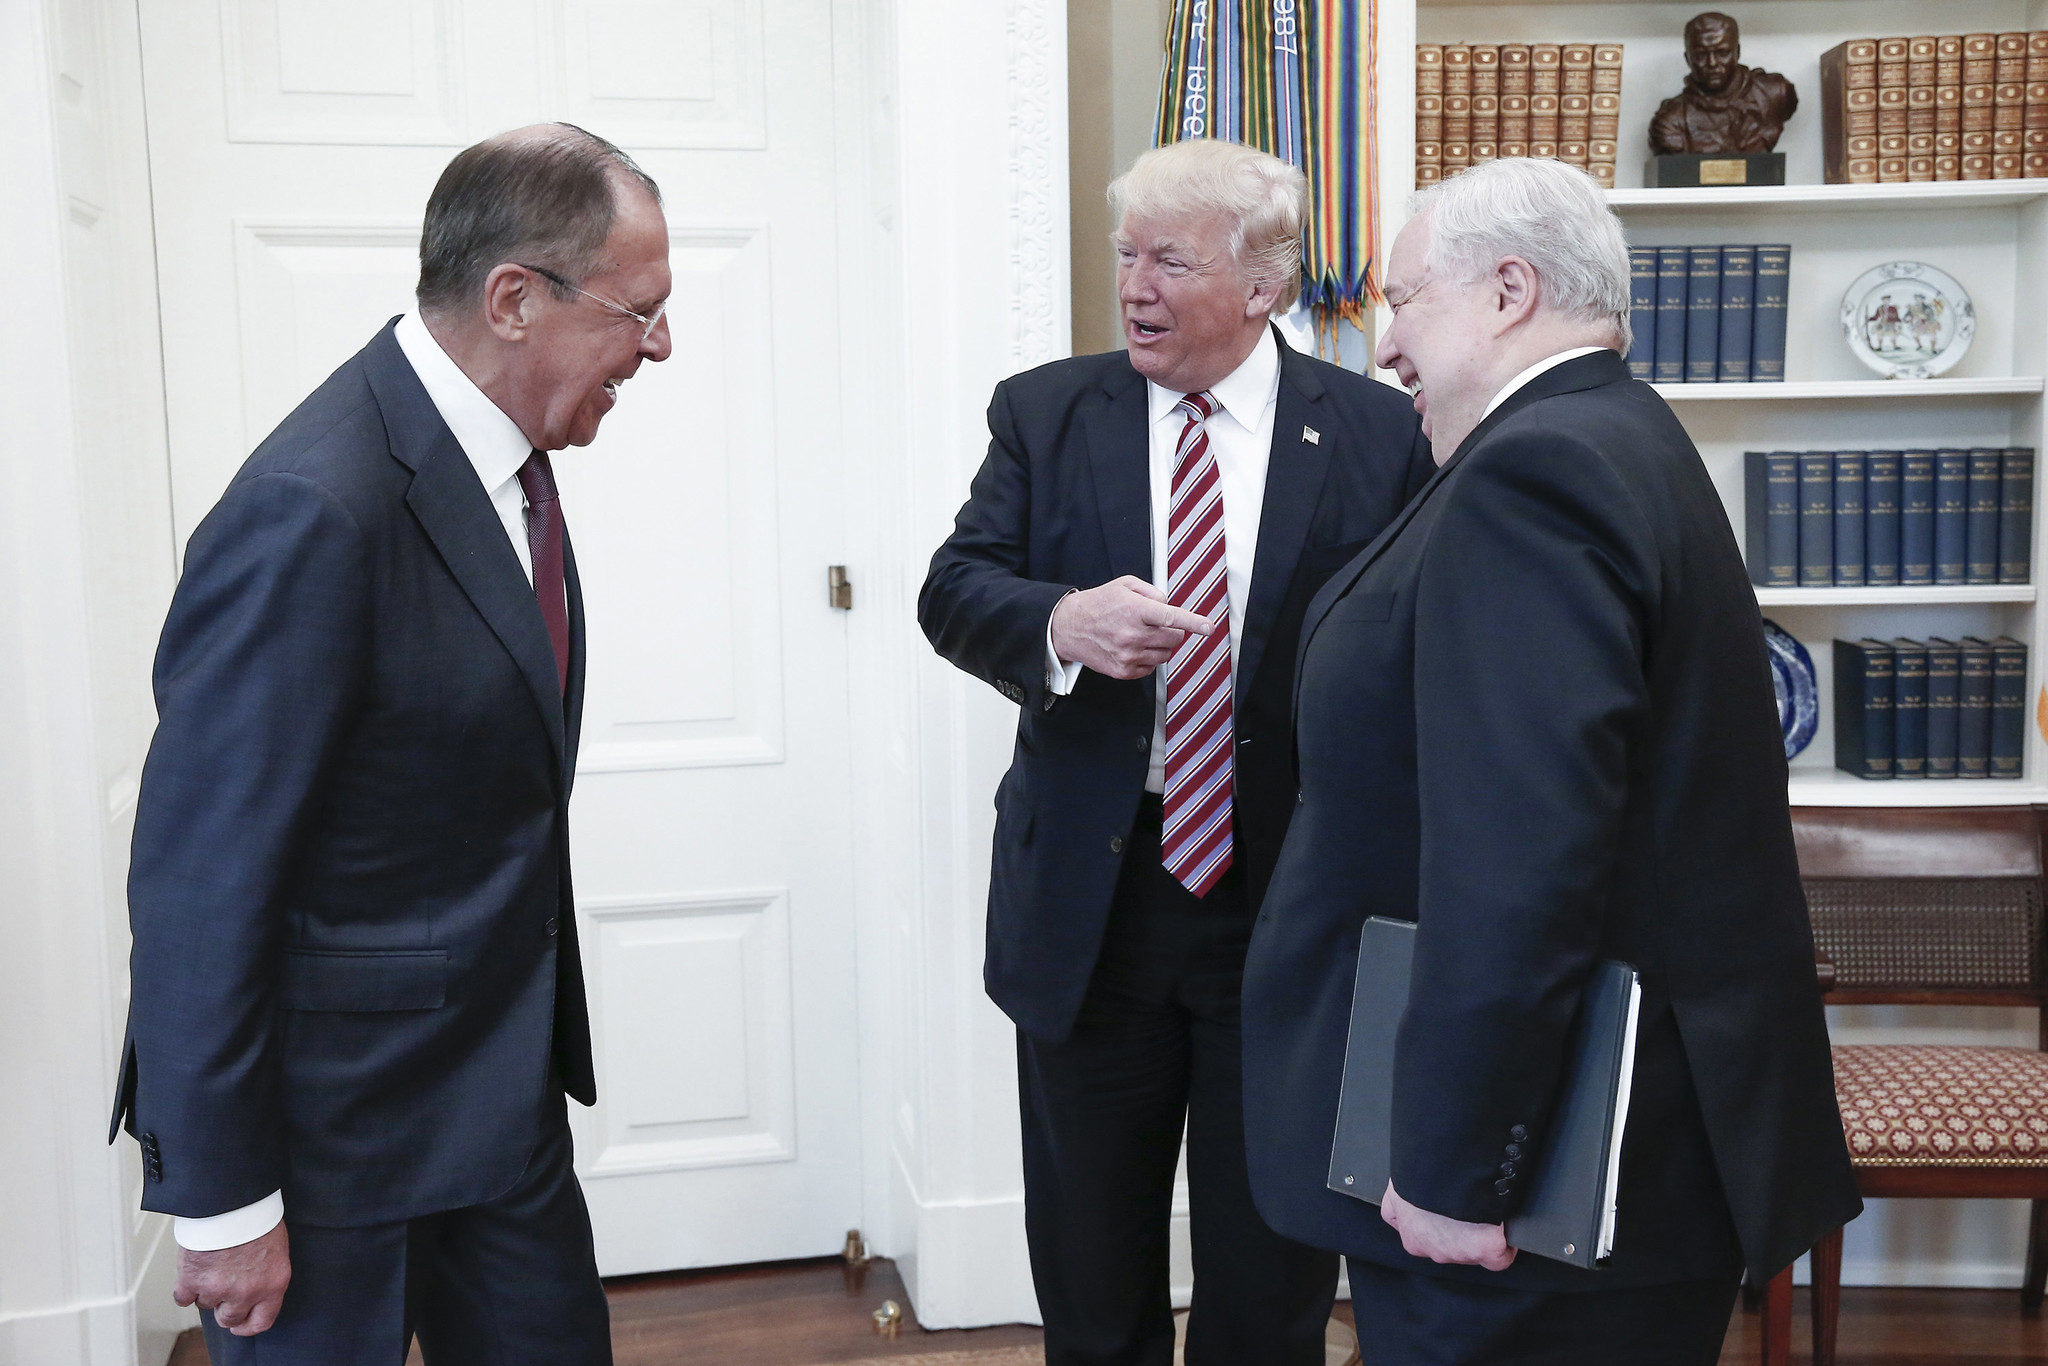 President Trump meets with Russian officials in the Oval Office